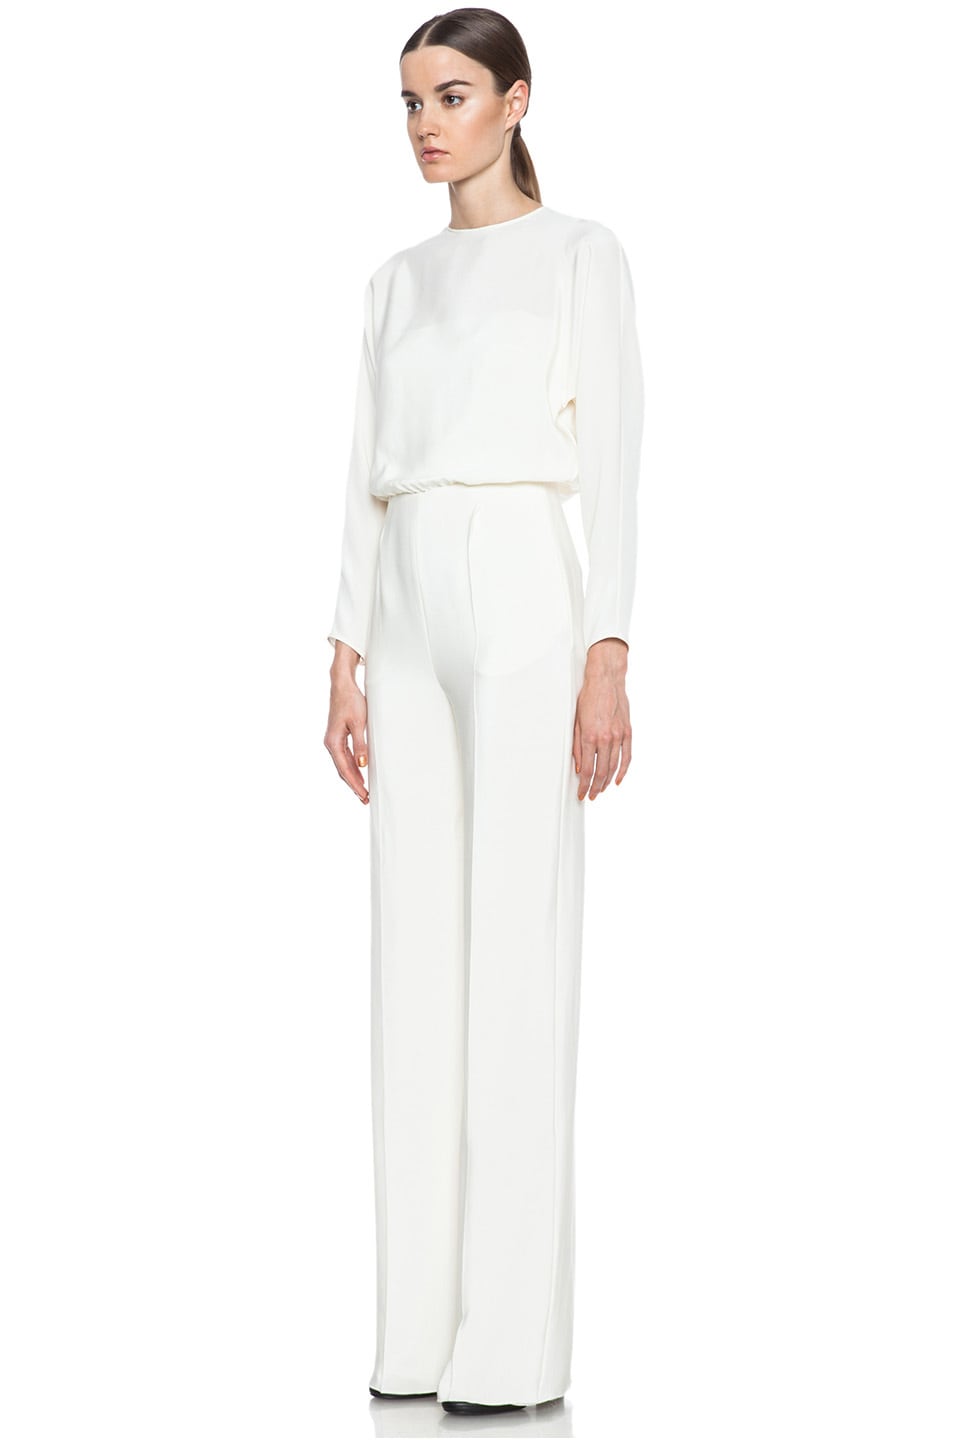 Valentino Open Back Silk Jumpsuit in Ivory | FWRD